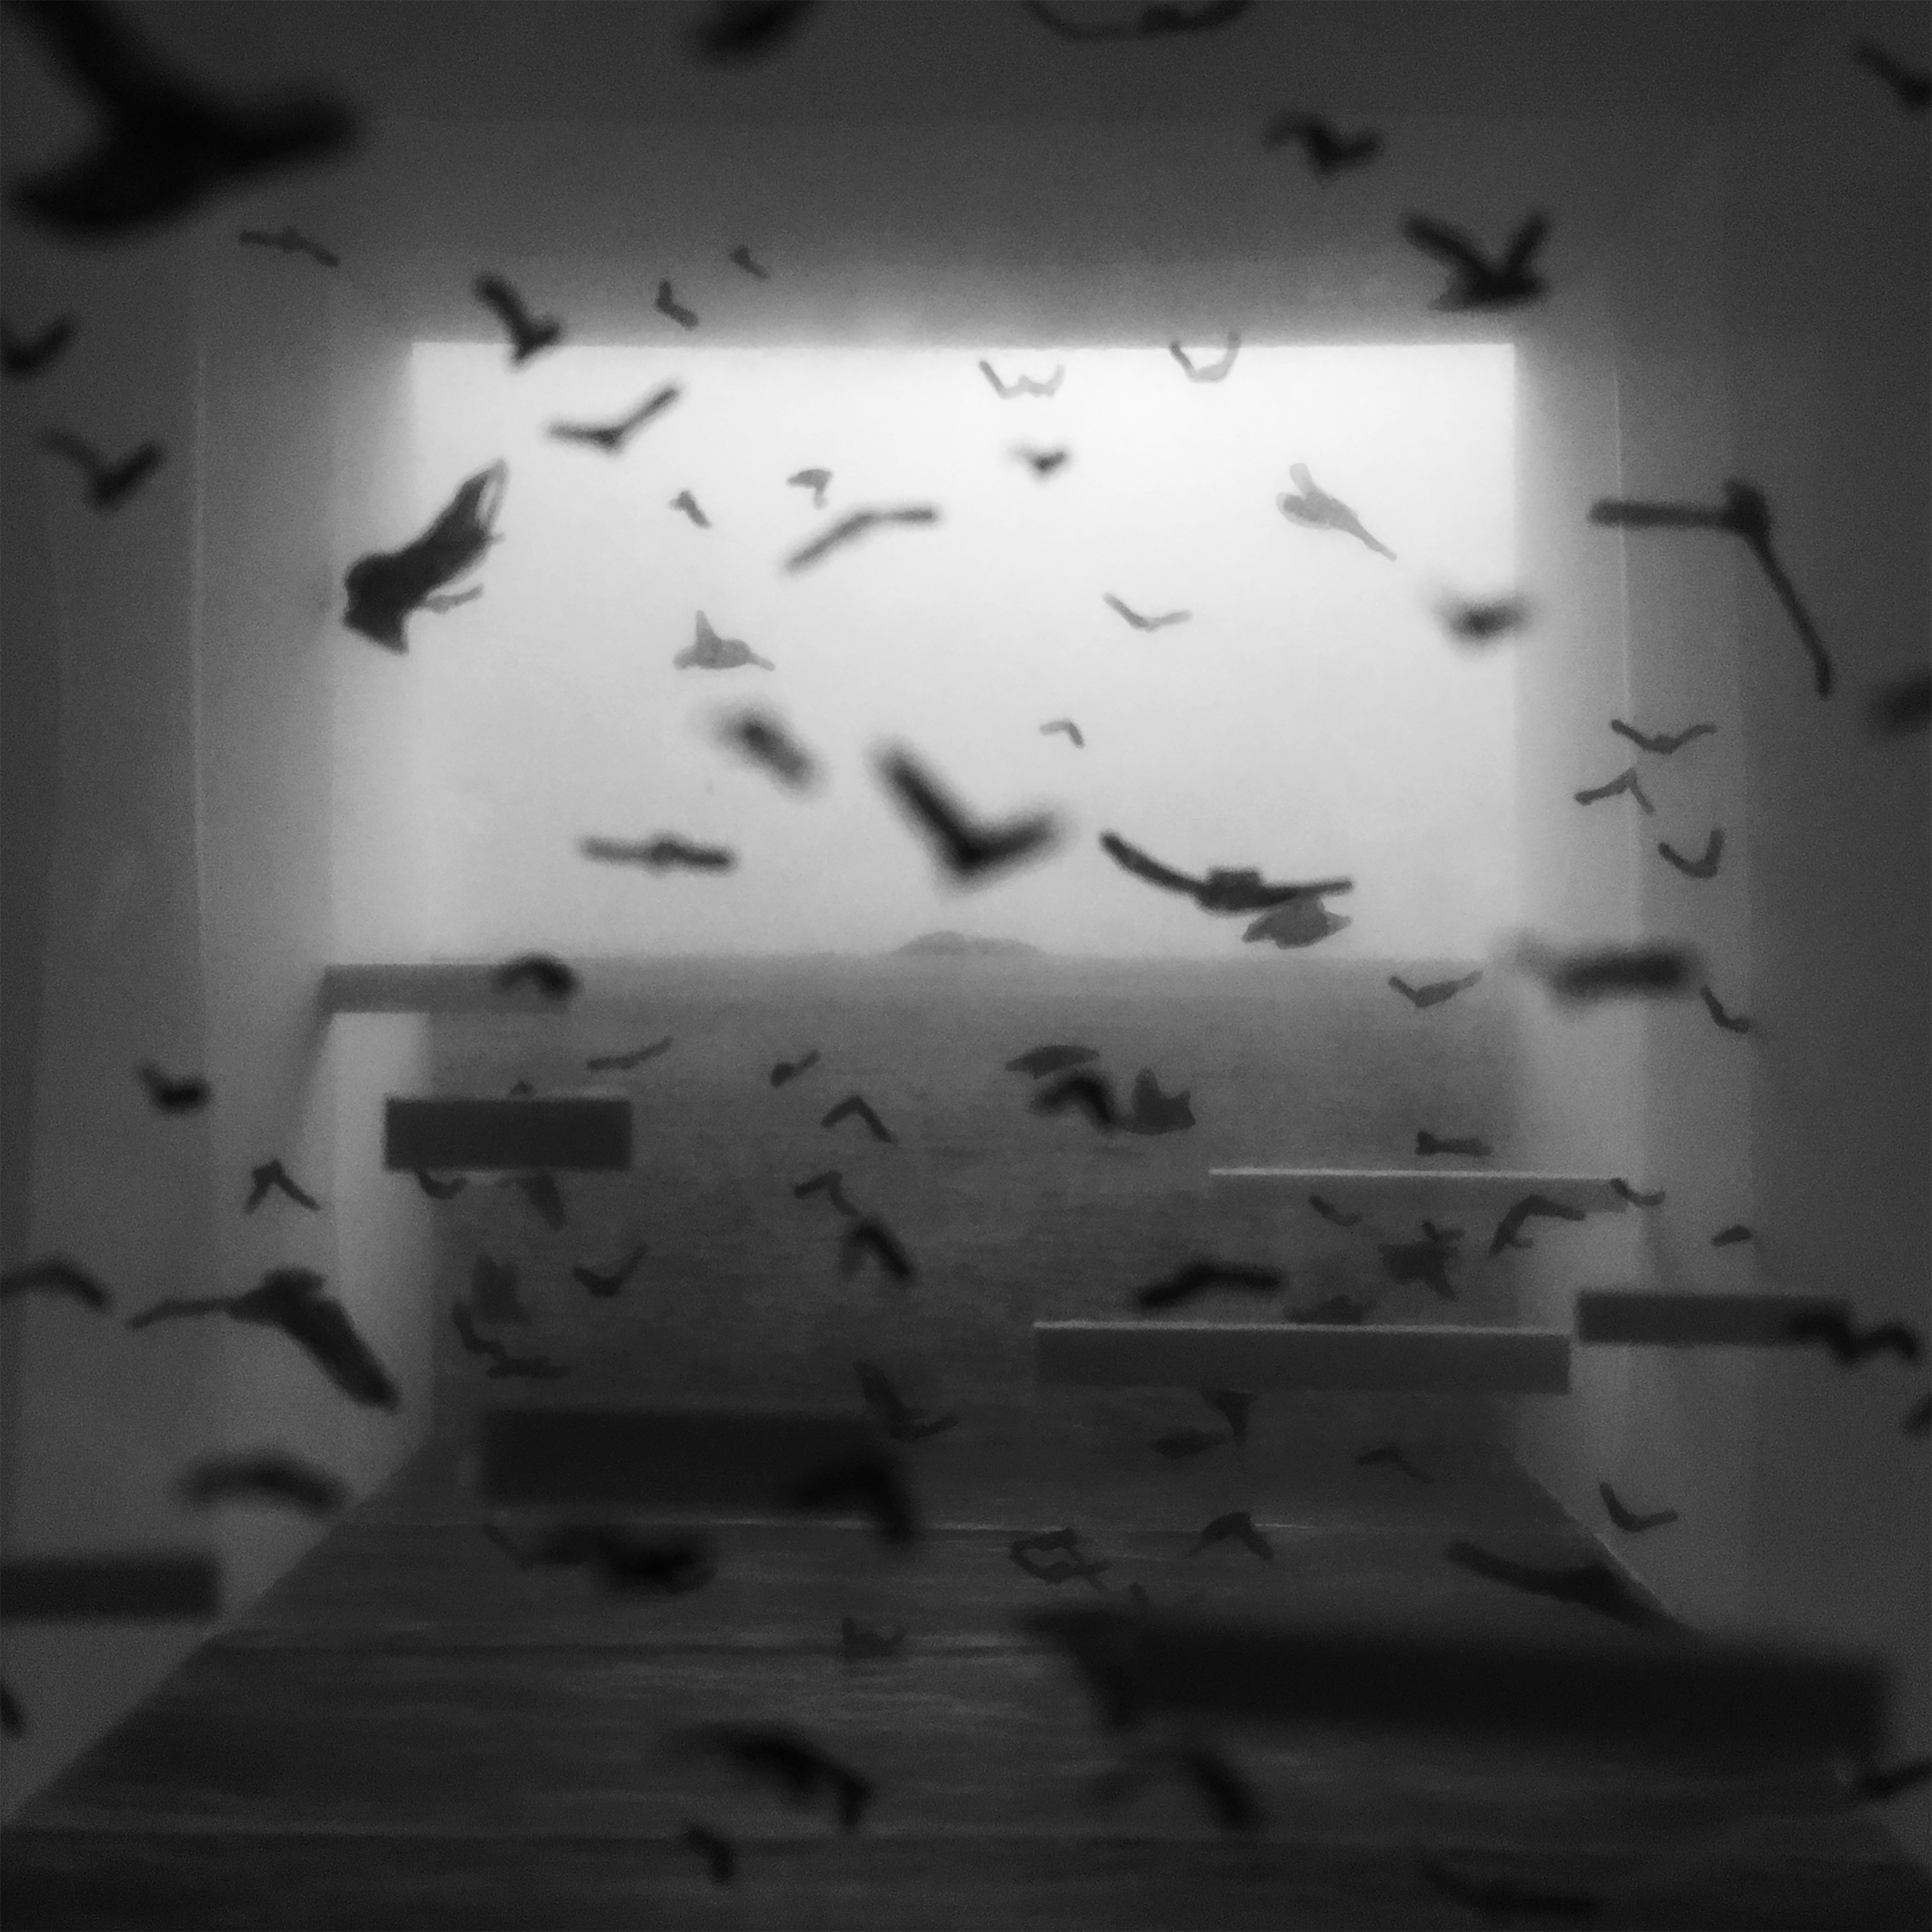 black and white surreal image of flying birds inside a room